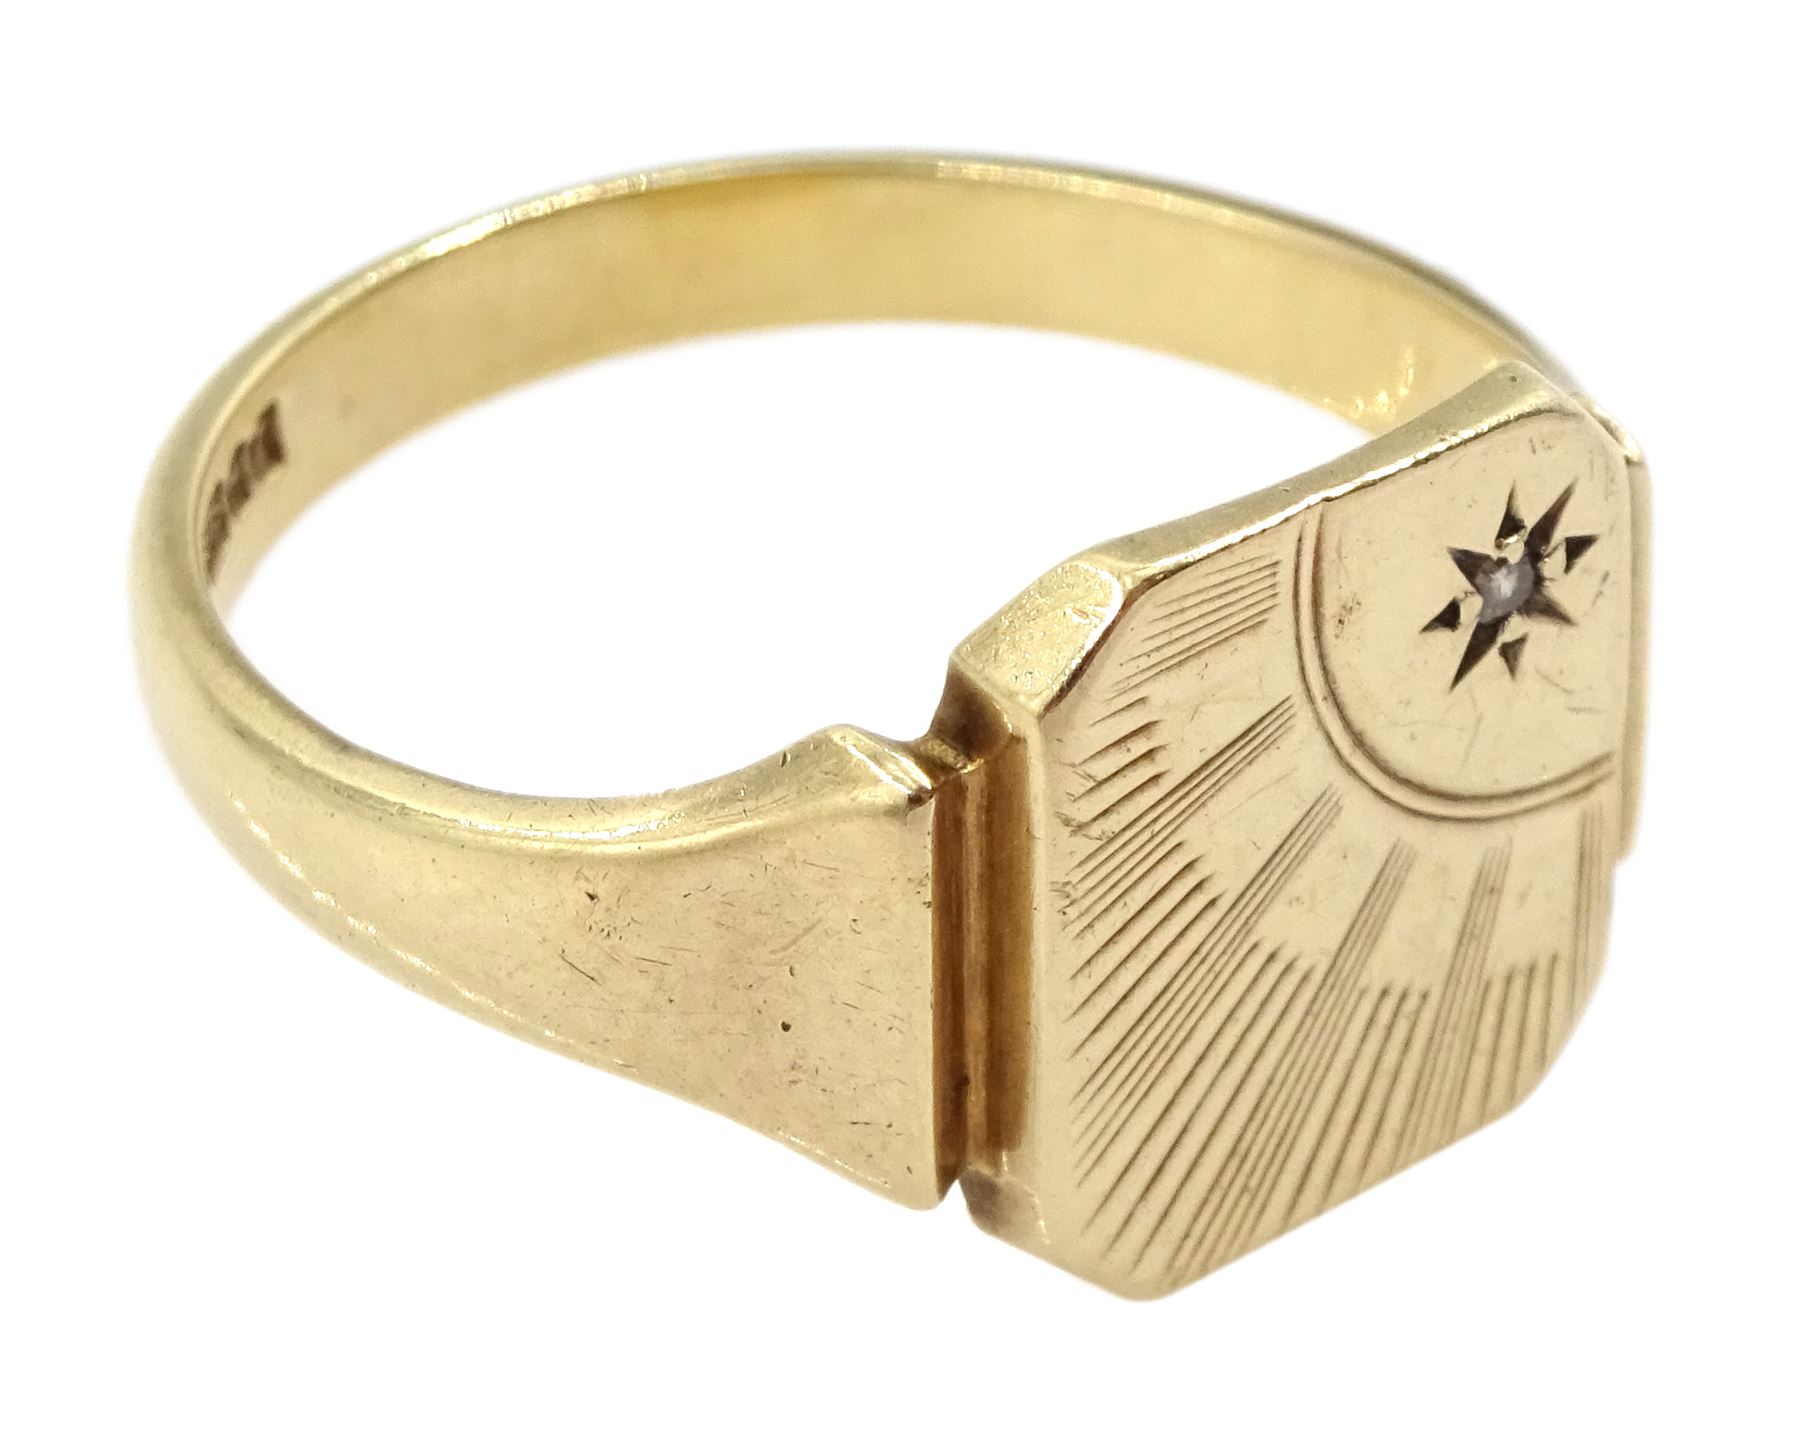 9ct gold signet ring set with a single stone diamond - Image 3 of 4